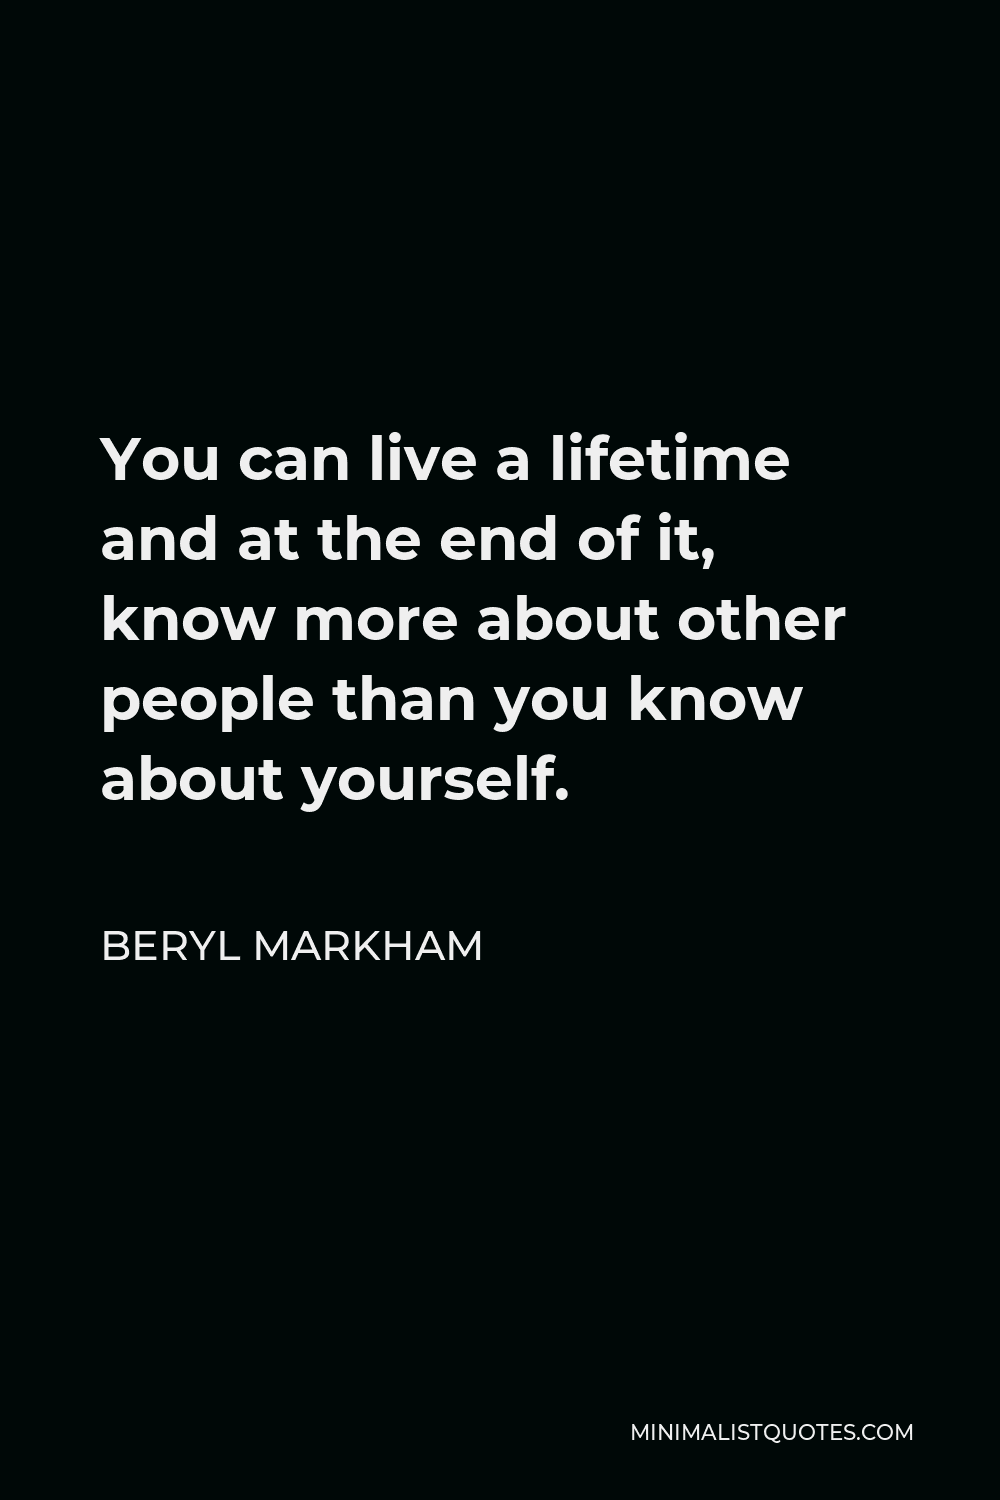 Beryl Markham Quote - You can live a lifetime and at the end of it, know more about other people than you know about yourself.